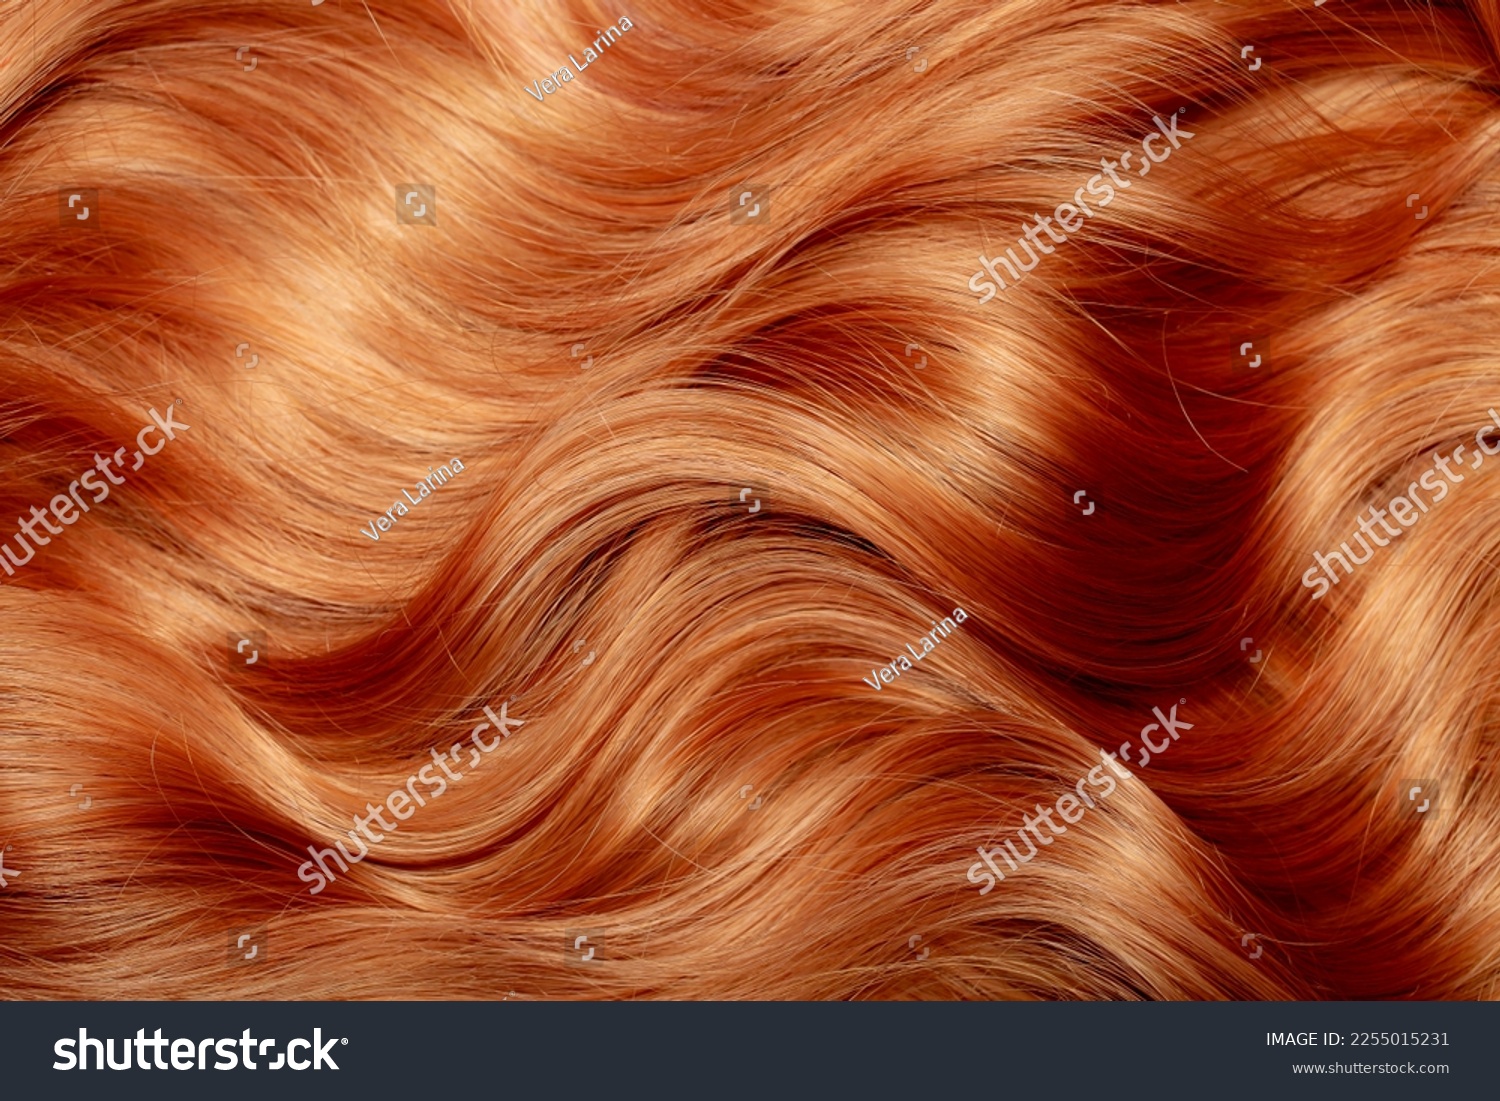 Red hair close-up as a background. Women's long orange hair. Beautifully styled wavy shiny curls. Hair coloring bright shades. Hairdressing procedures, extension. #2255015231